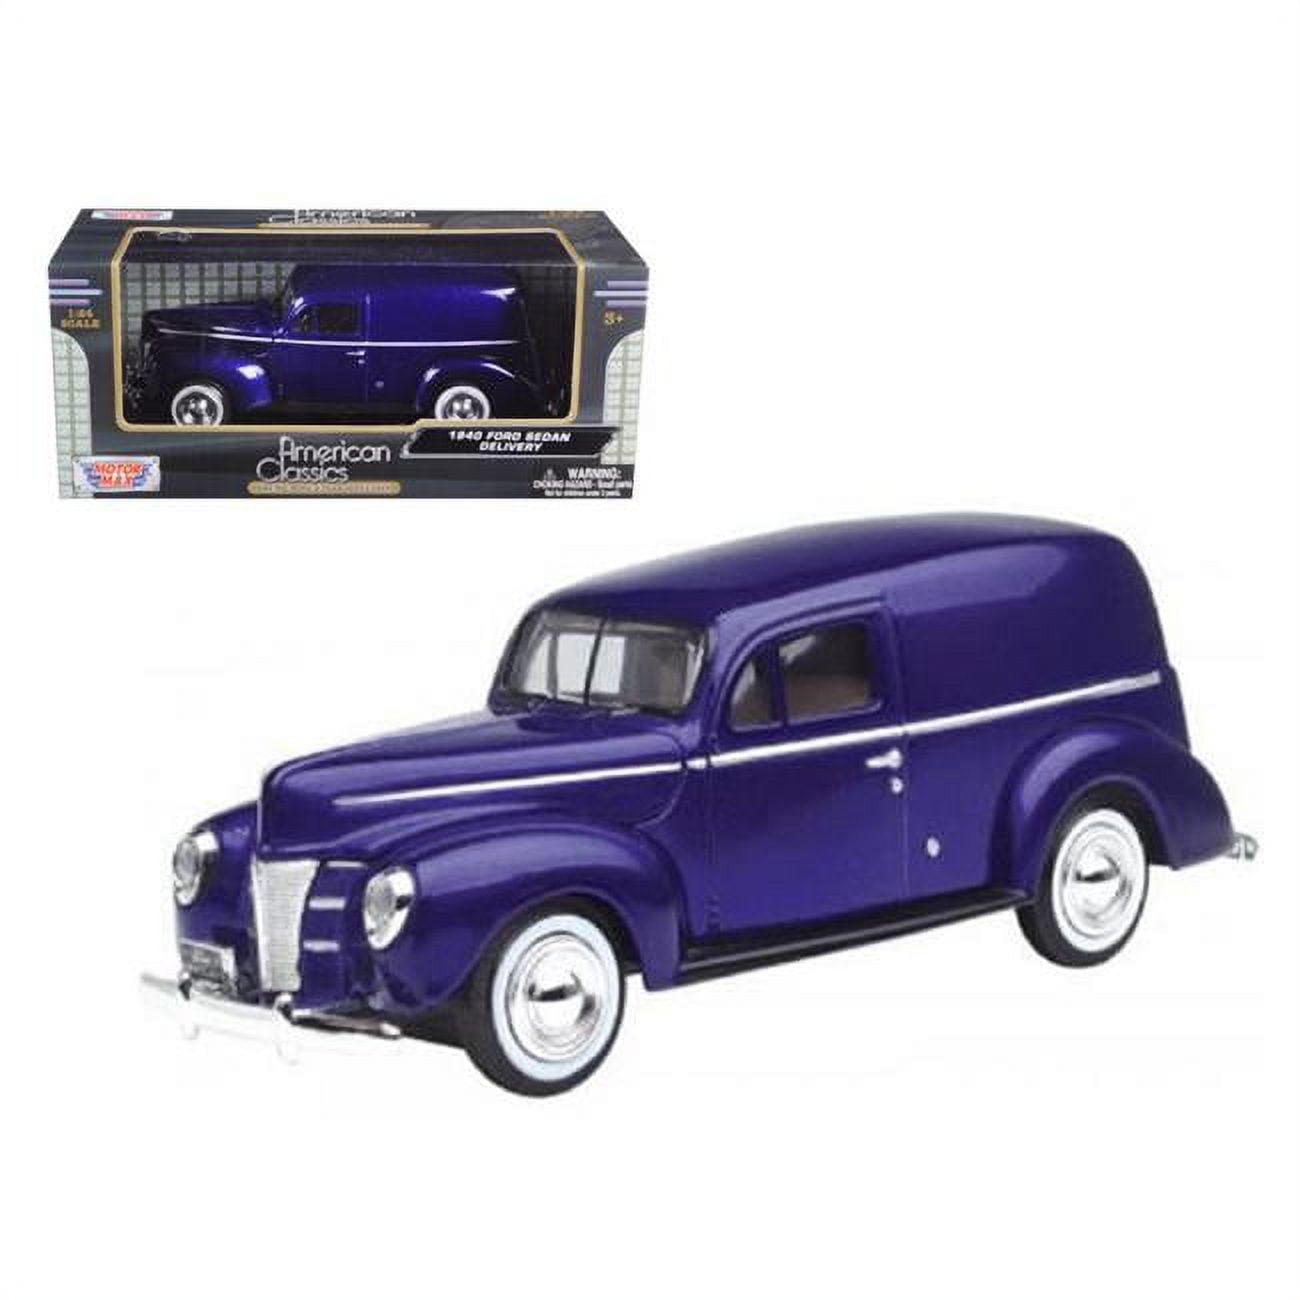 1 by 24 1940 Ford Sedan Delivery Diecast Car Model - Purple -  Play4Hours, PL994468